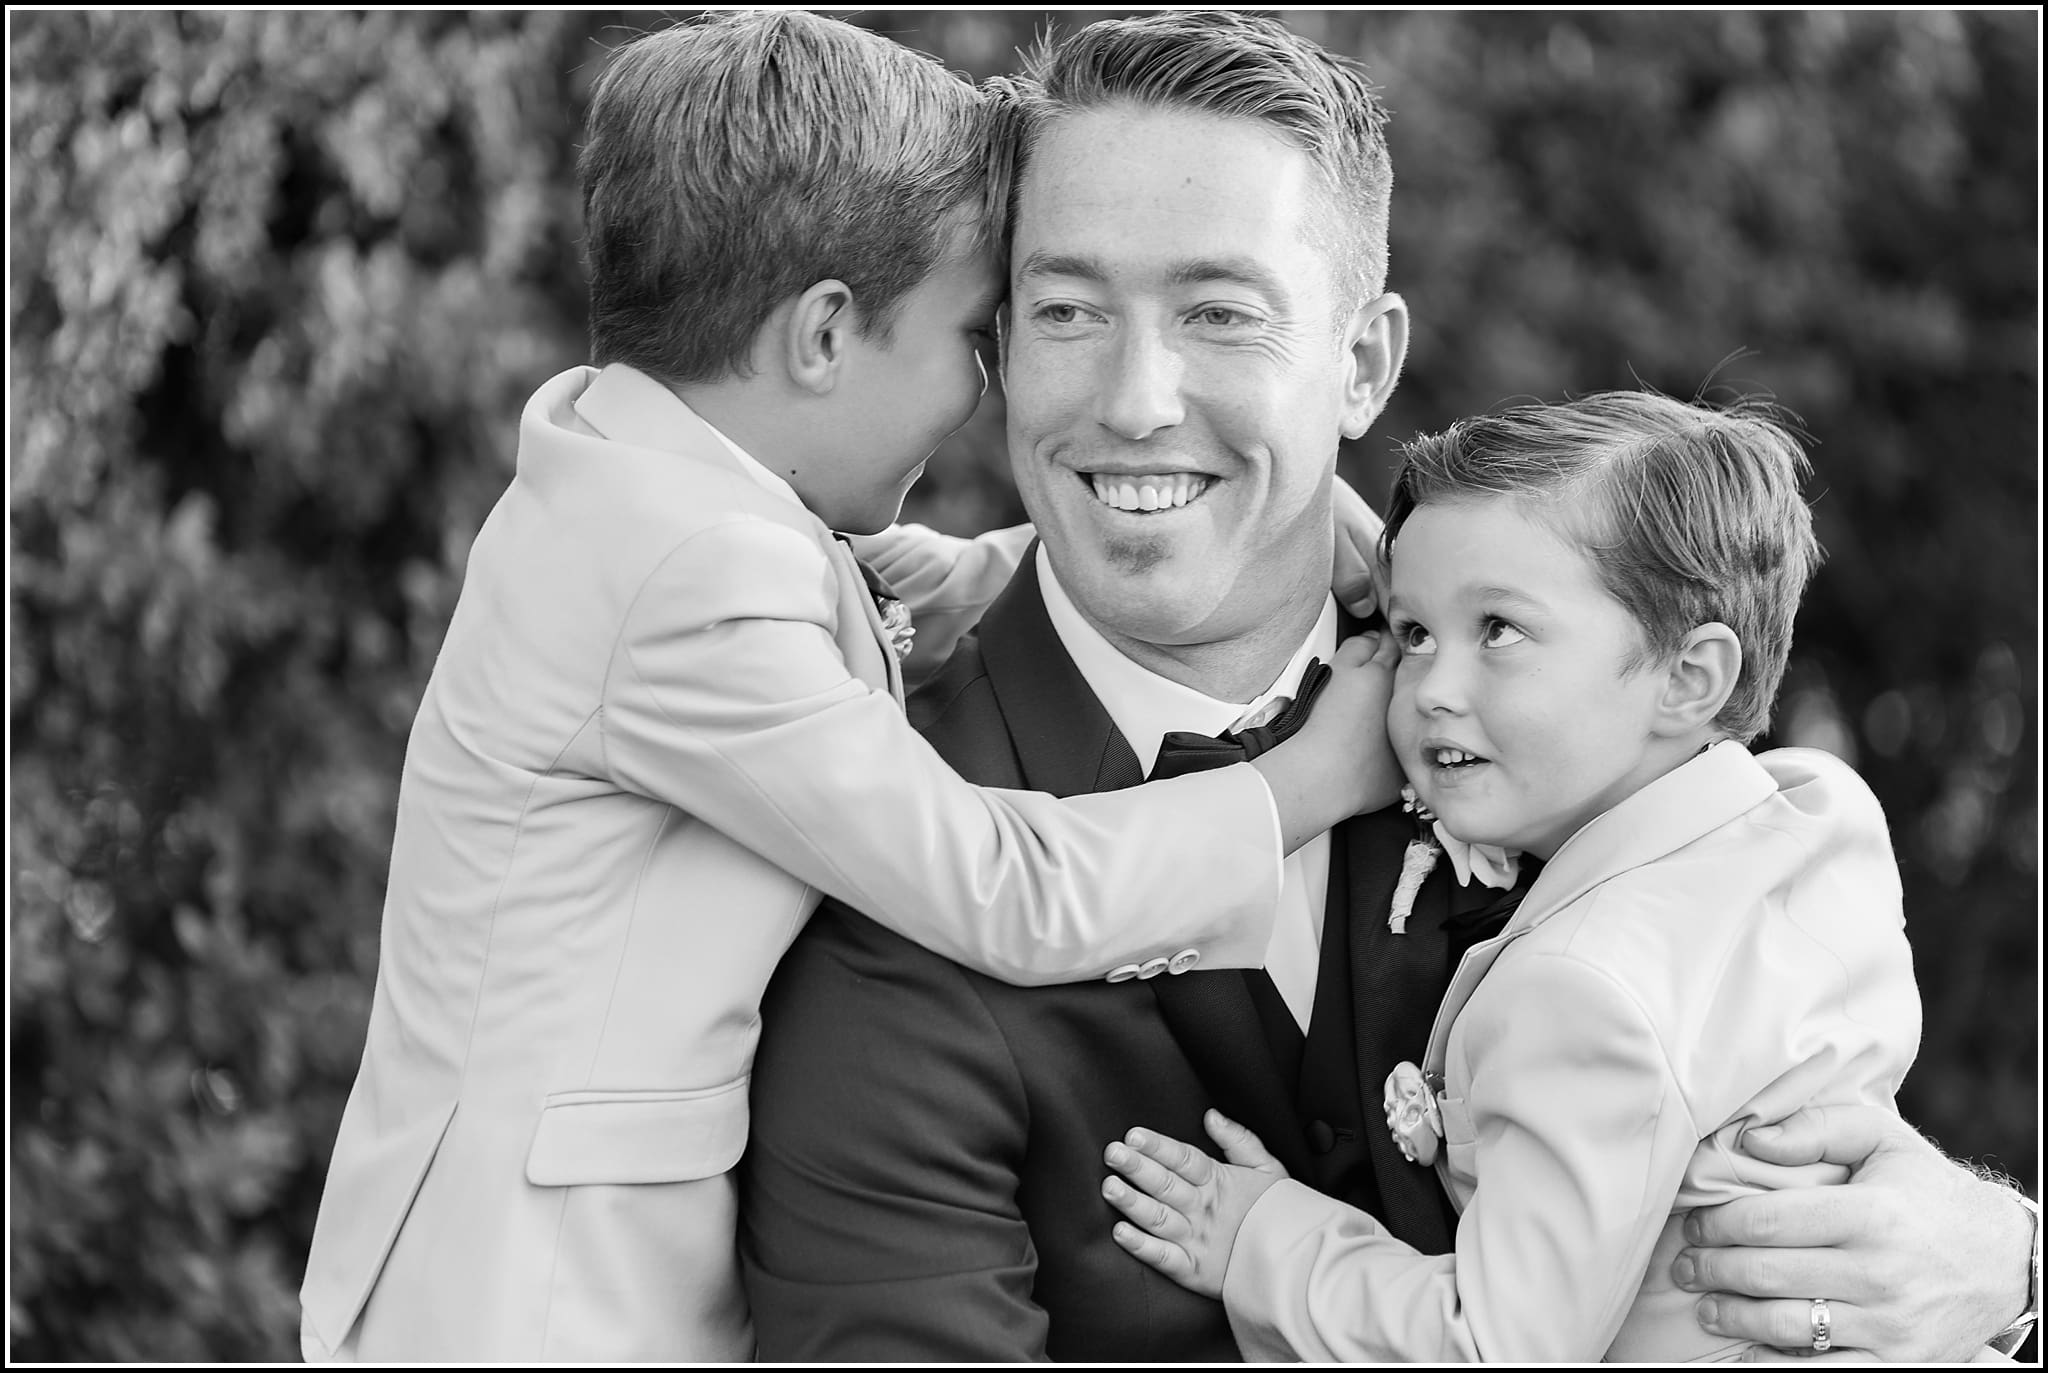  favorite wedding images 2016, wedding photos from 2016, our favorite wedding photos, father and sons portrait, groom and sons portrait